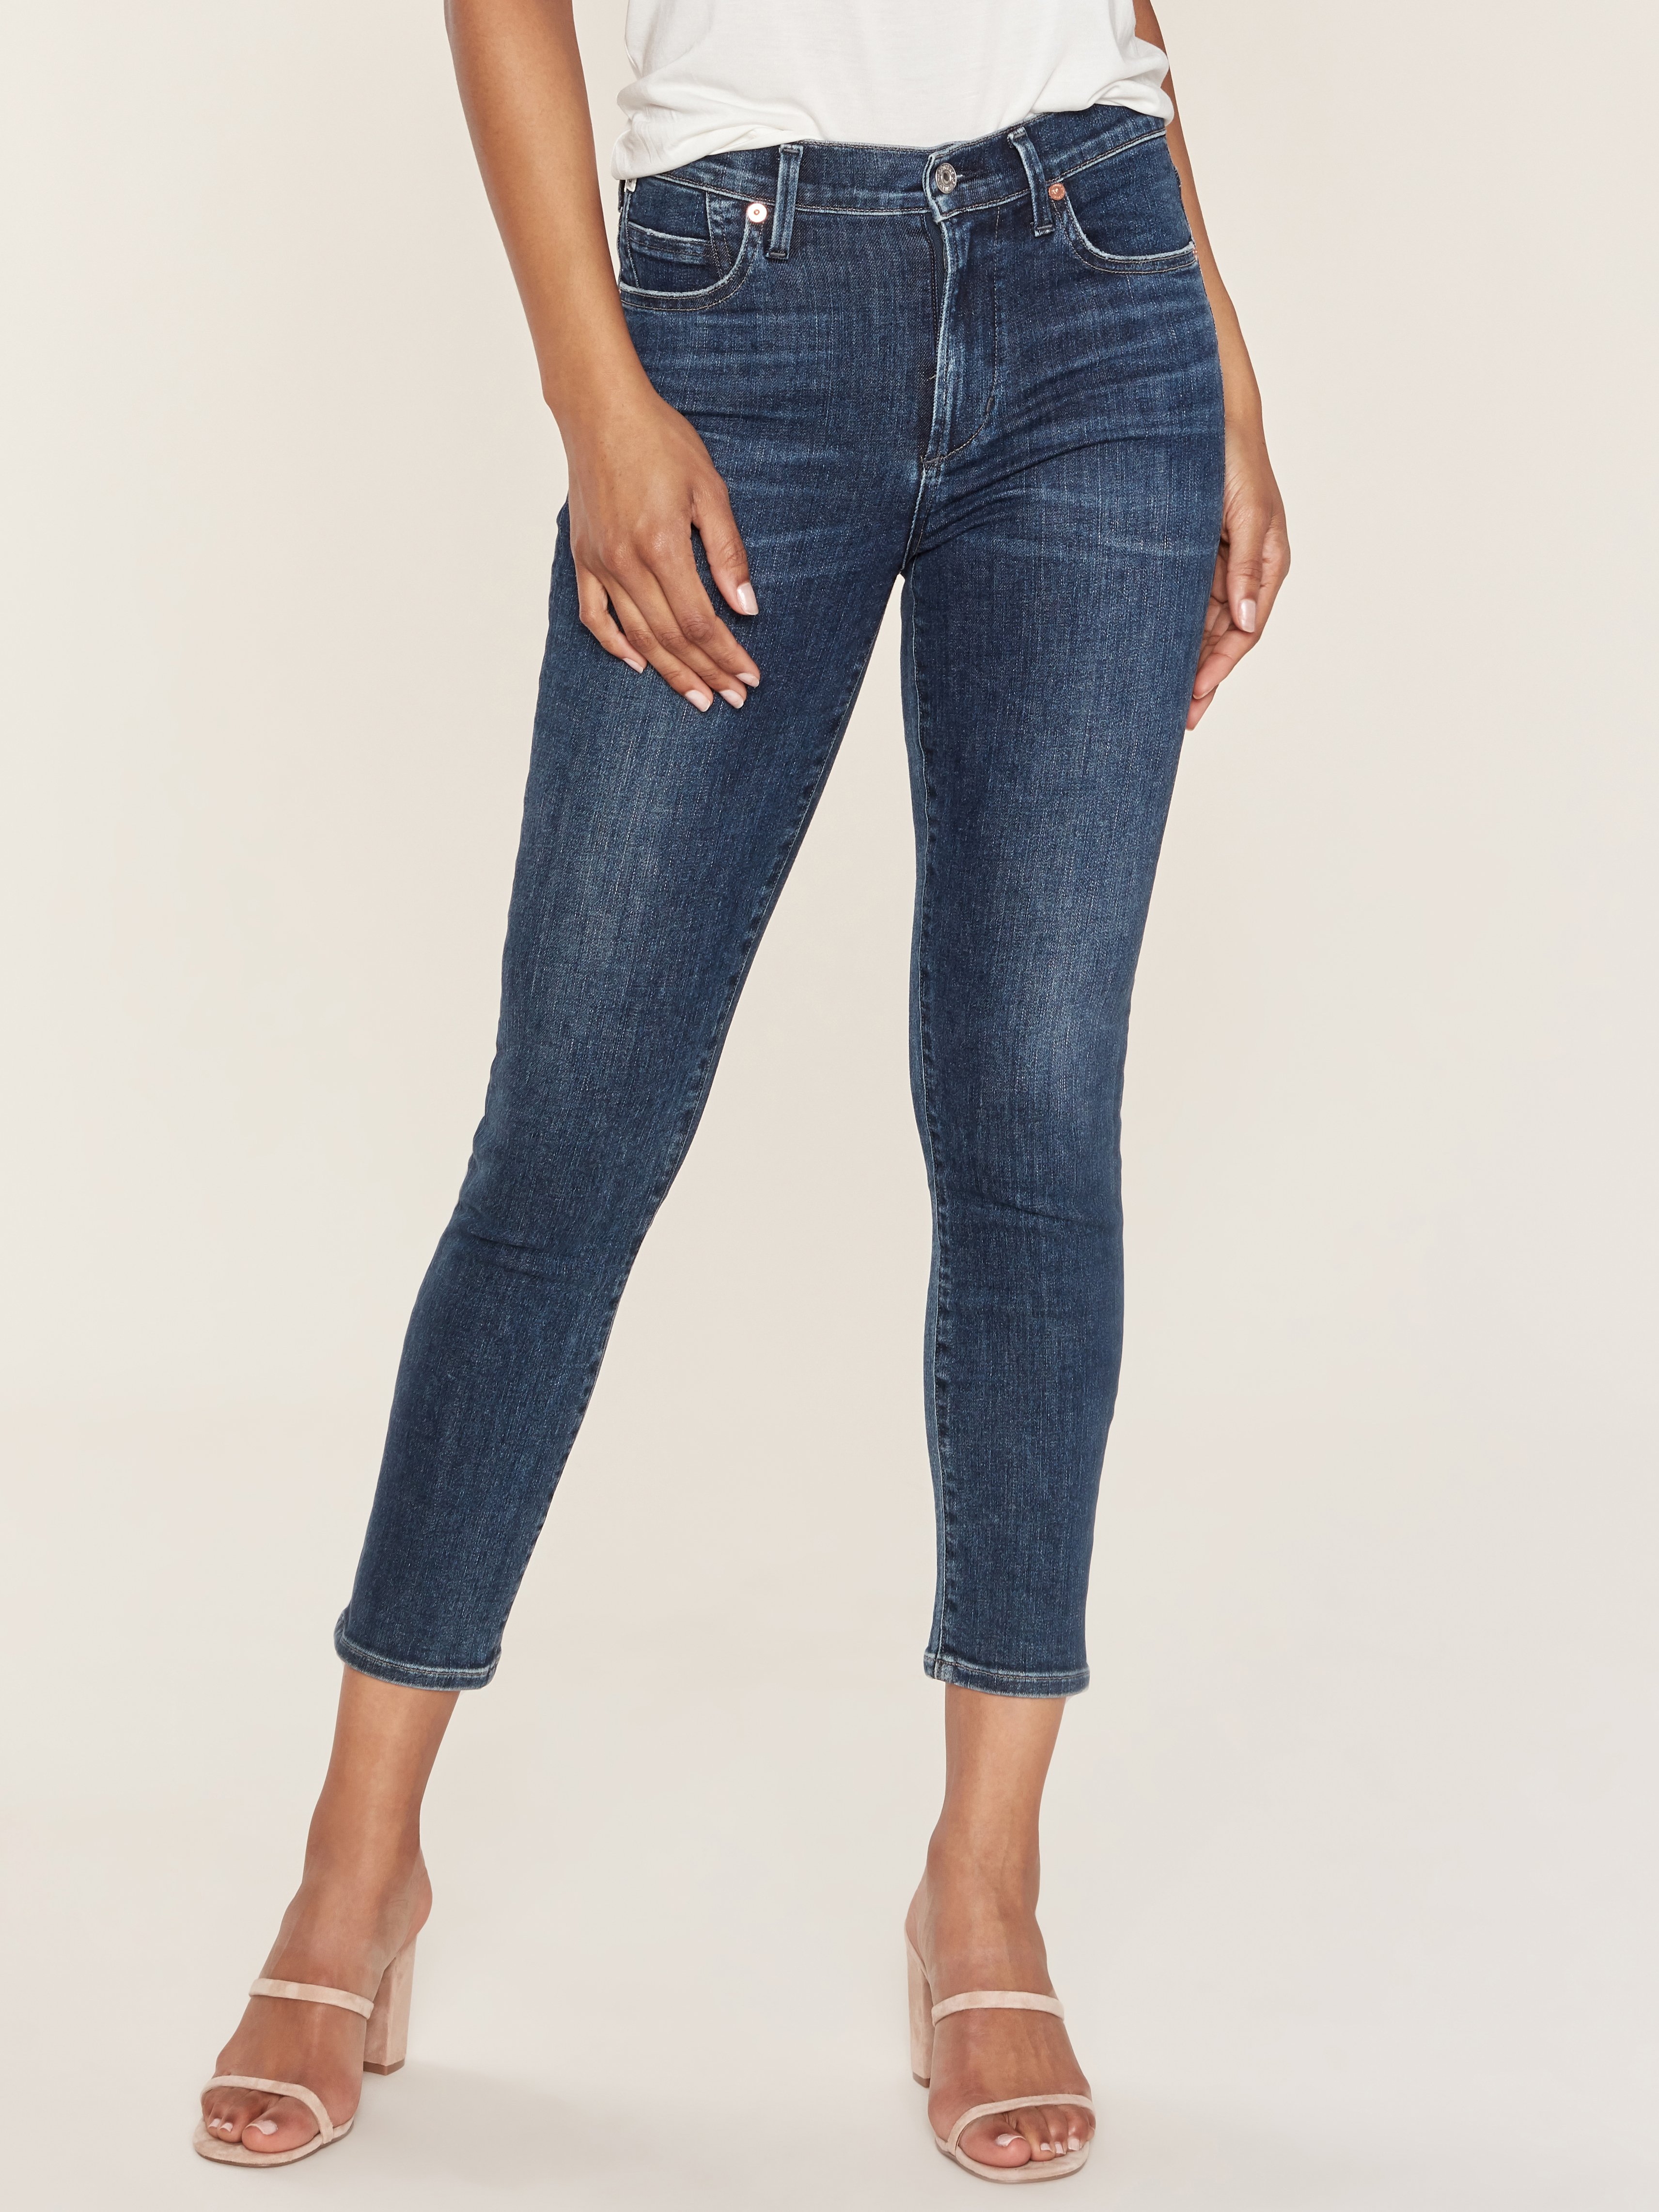 citizens of humanity skinny jeans